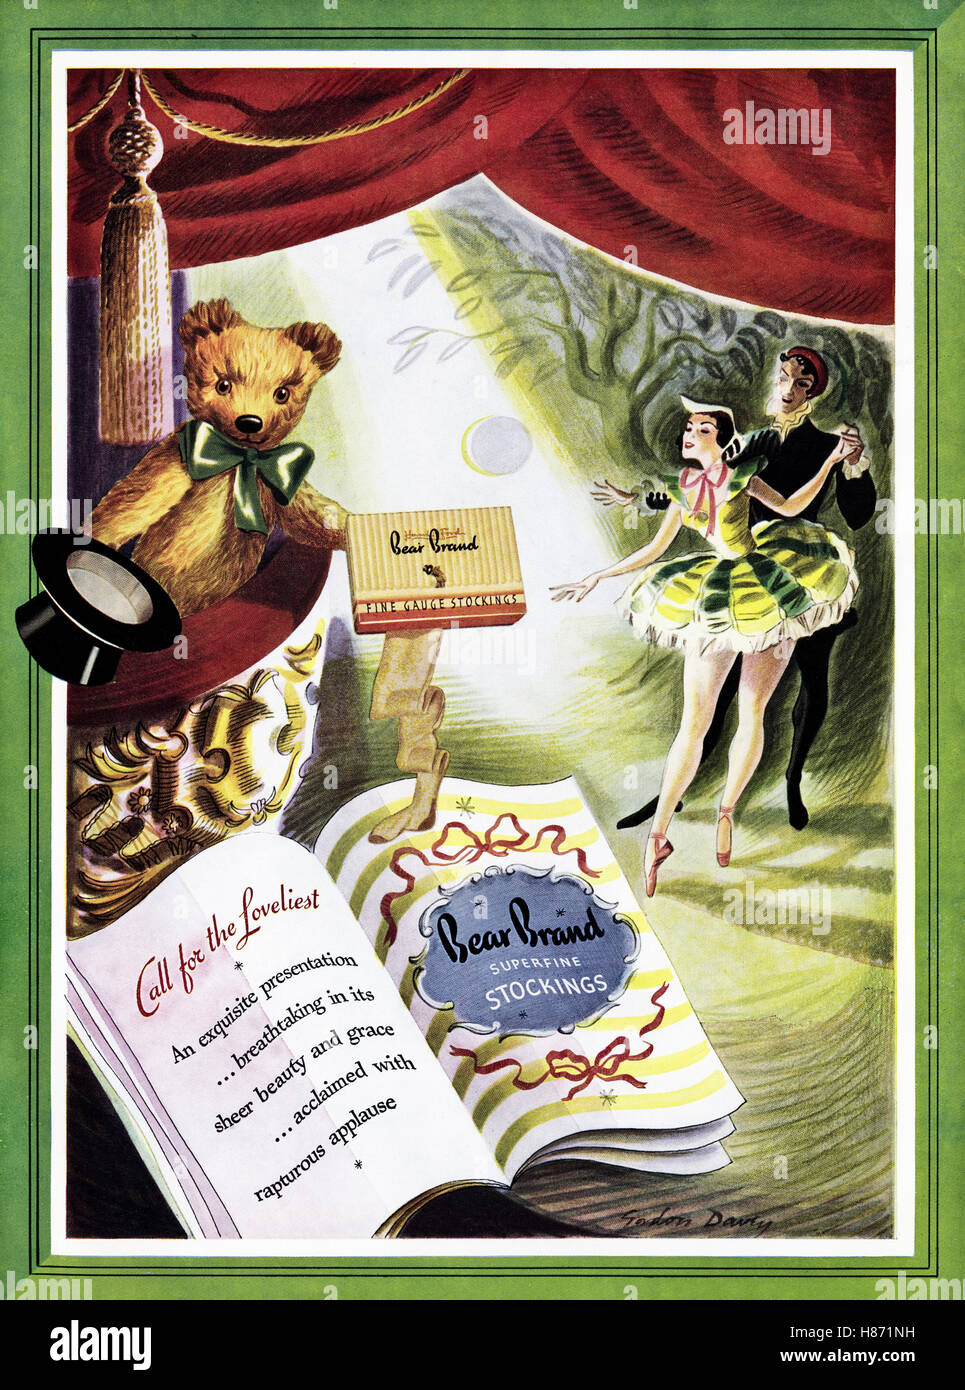 1950s advert advertising from original old vintage English magazine dated 1953 advertisement for Bear Brand superfine stockings Stock Photo